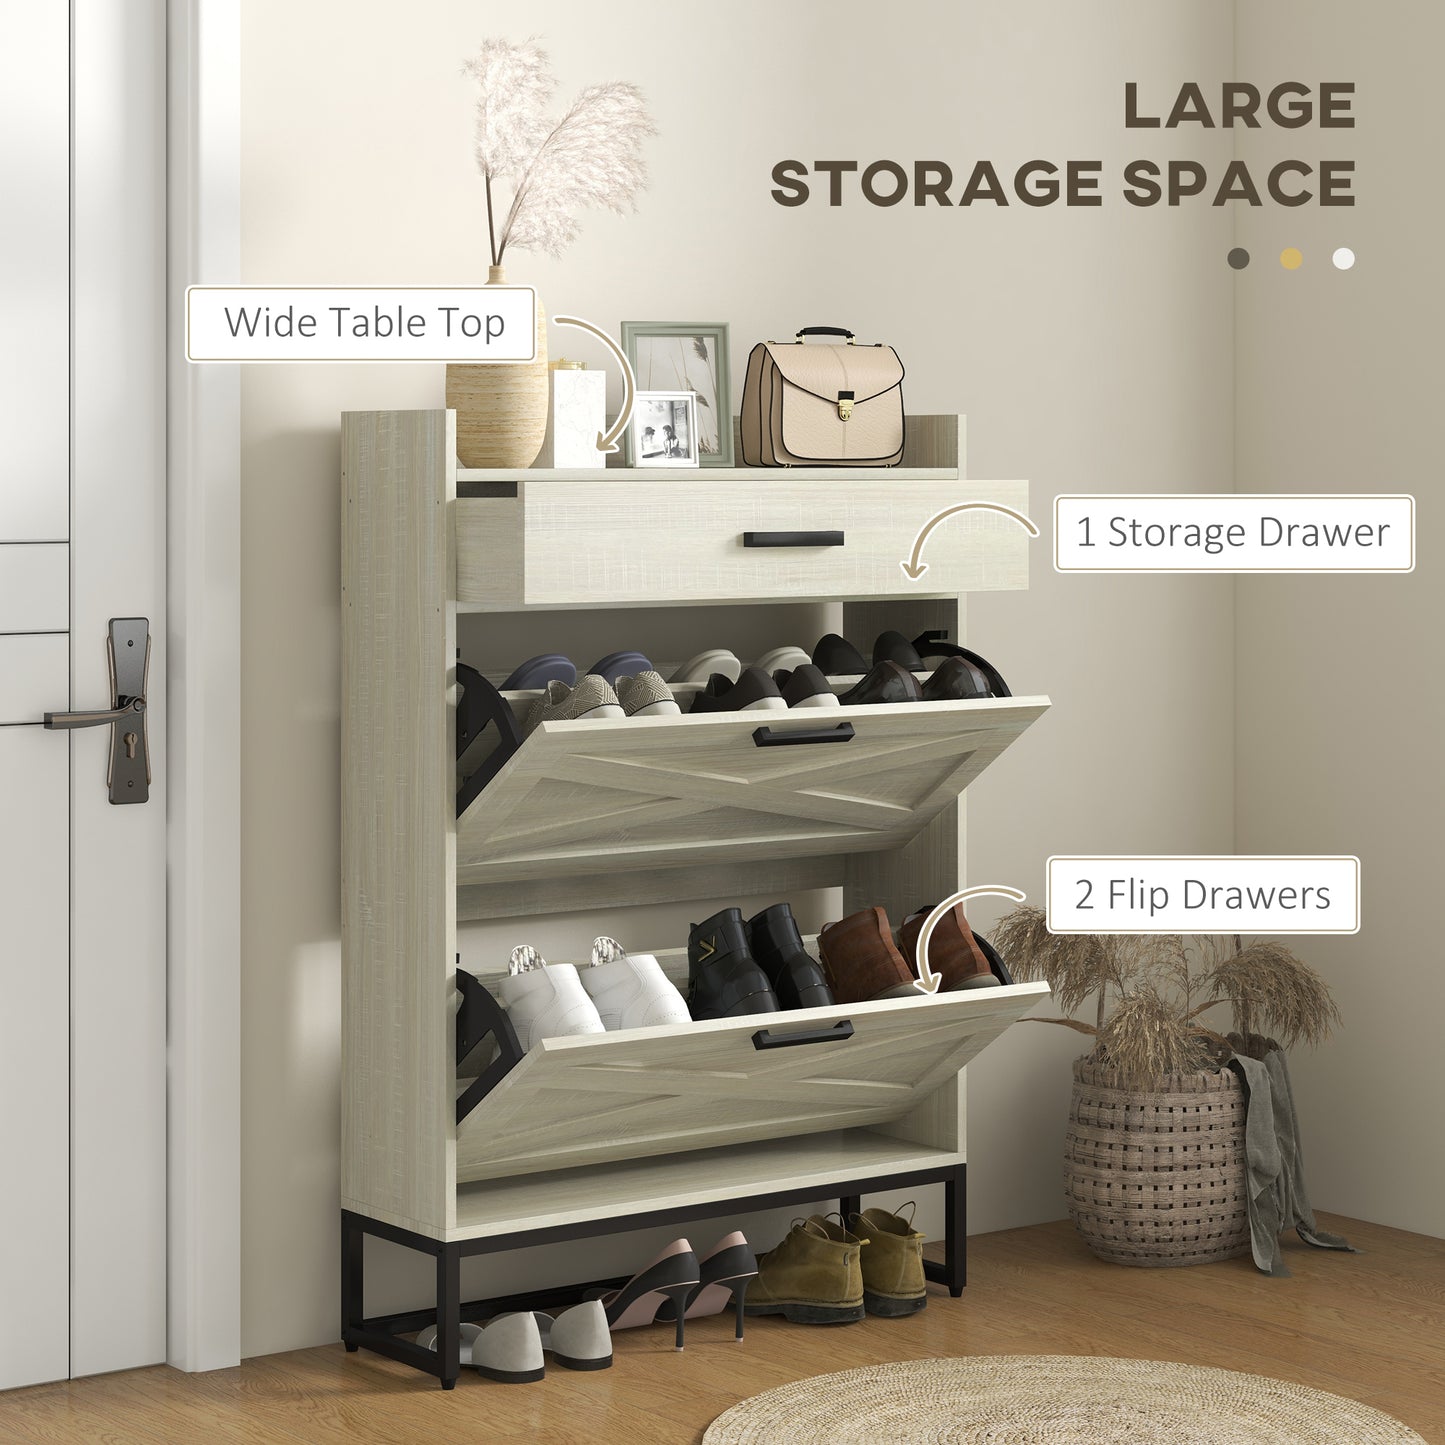 Slim Shoe Storage with 2 Flip Drawers and Adjustable Shoe Shelves for 12 Pair, Distressed White